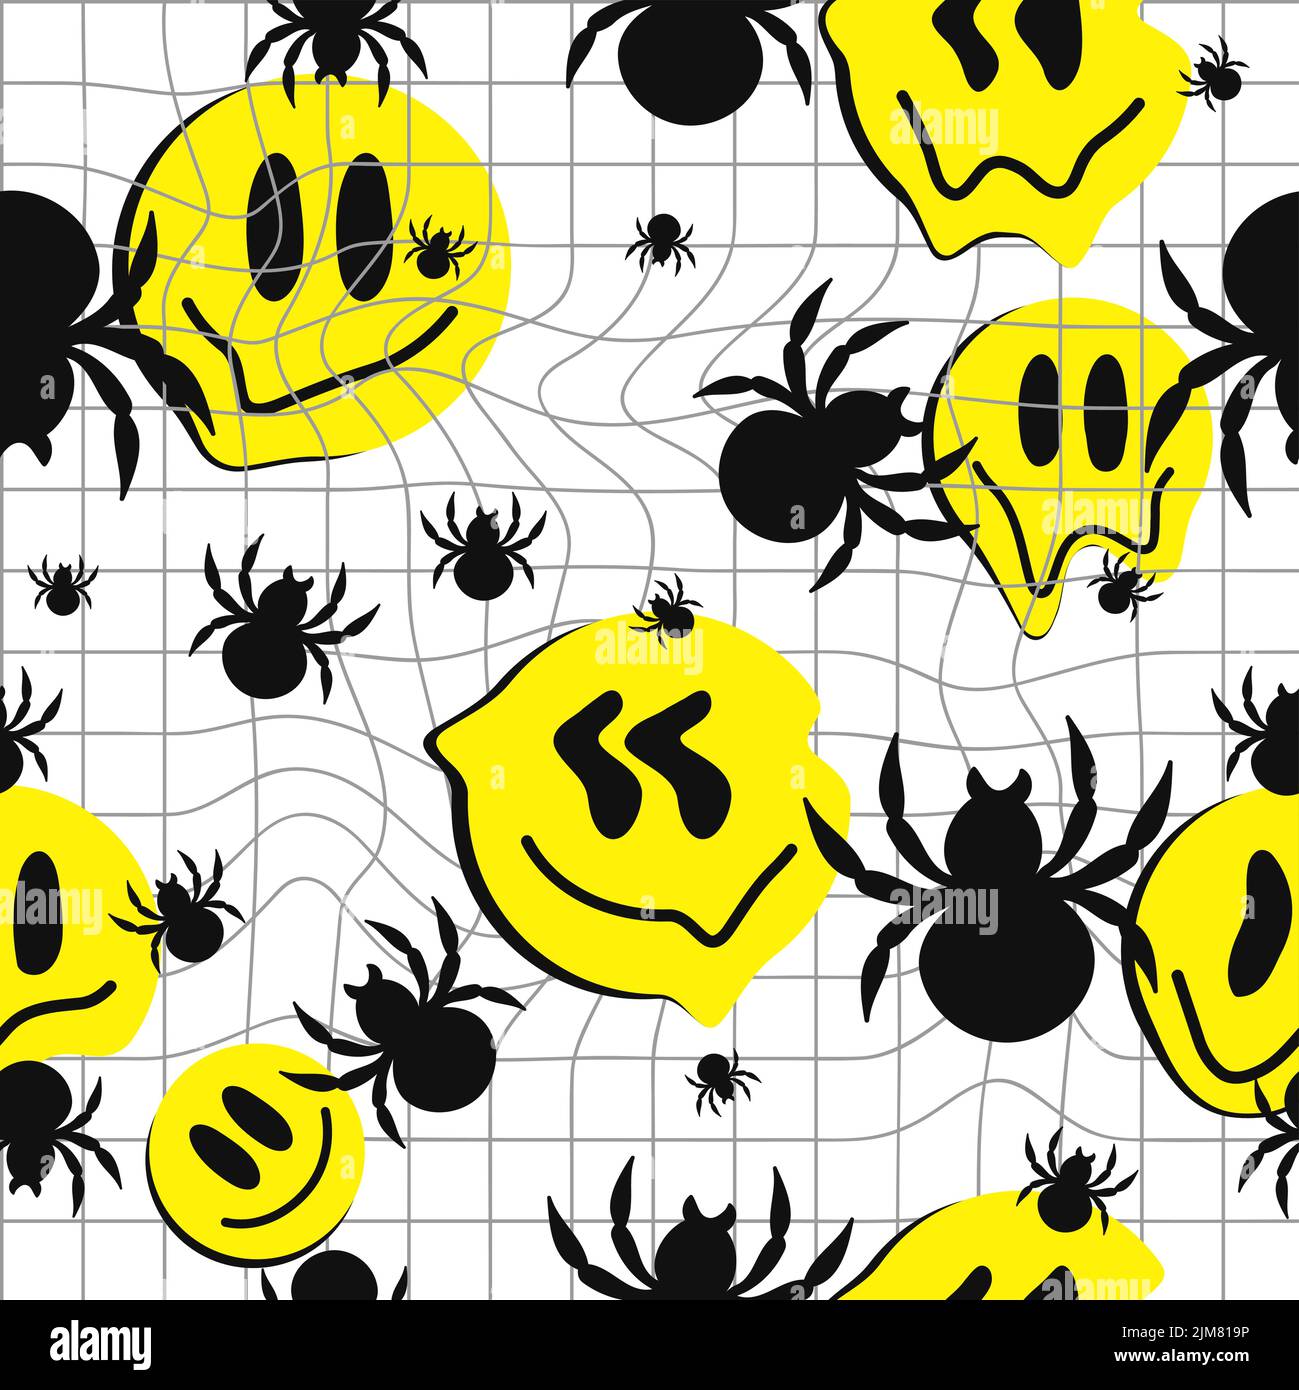 Black and white distorted grid,spiders,melt smile face seamless pattern. Vector illustration. Deform warp grid,distortion,smile emoji face,techno,spider seamless pattern wallpaper concept Stock Vector